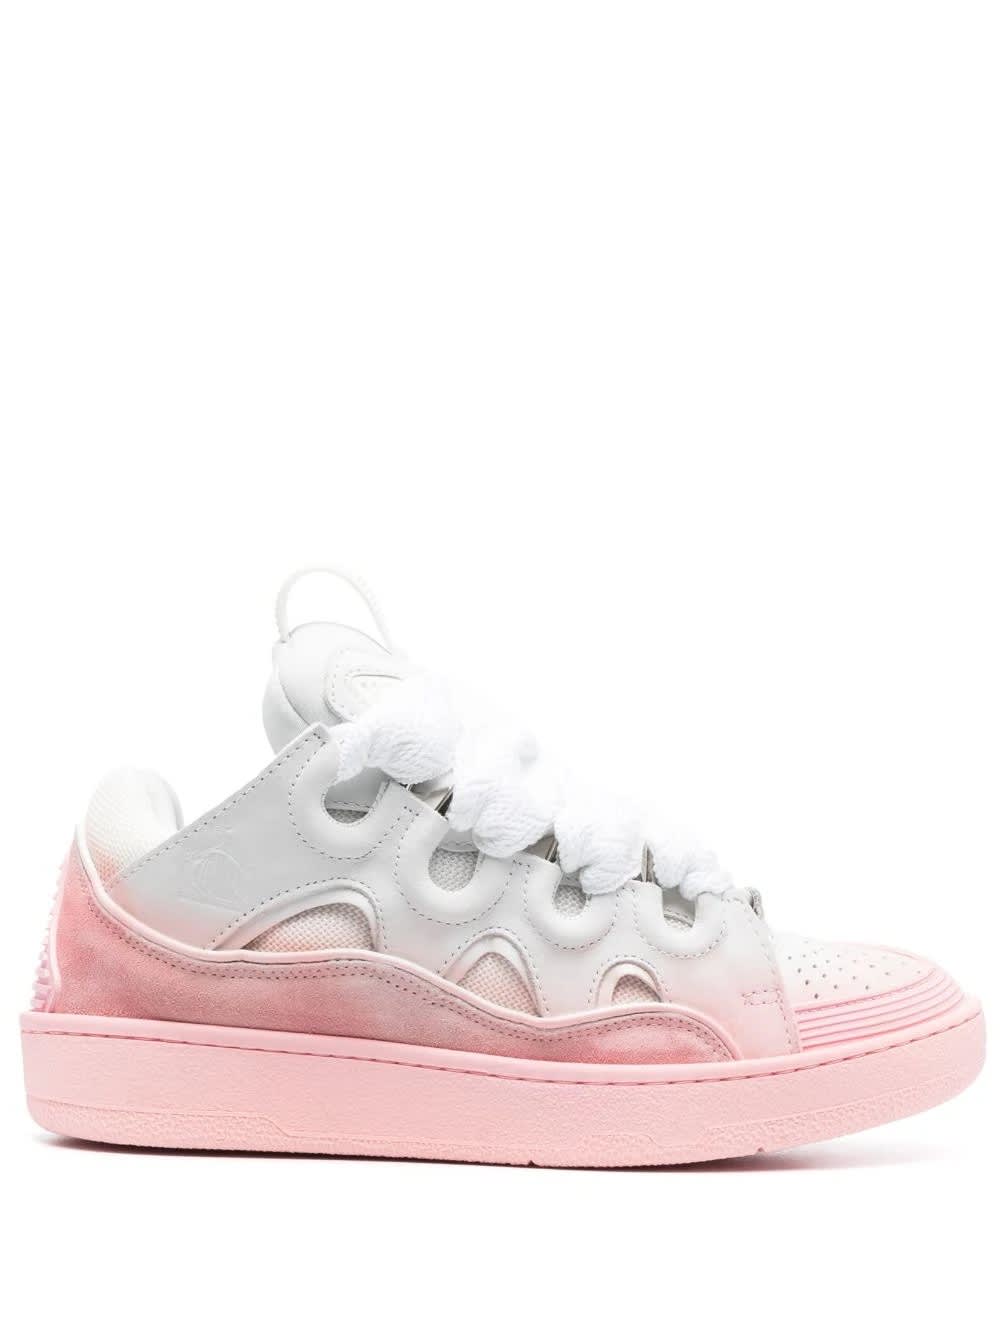 LANVIN WHITE AND PINK CURB SNEAKERS IN LEATHER